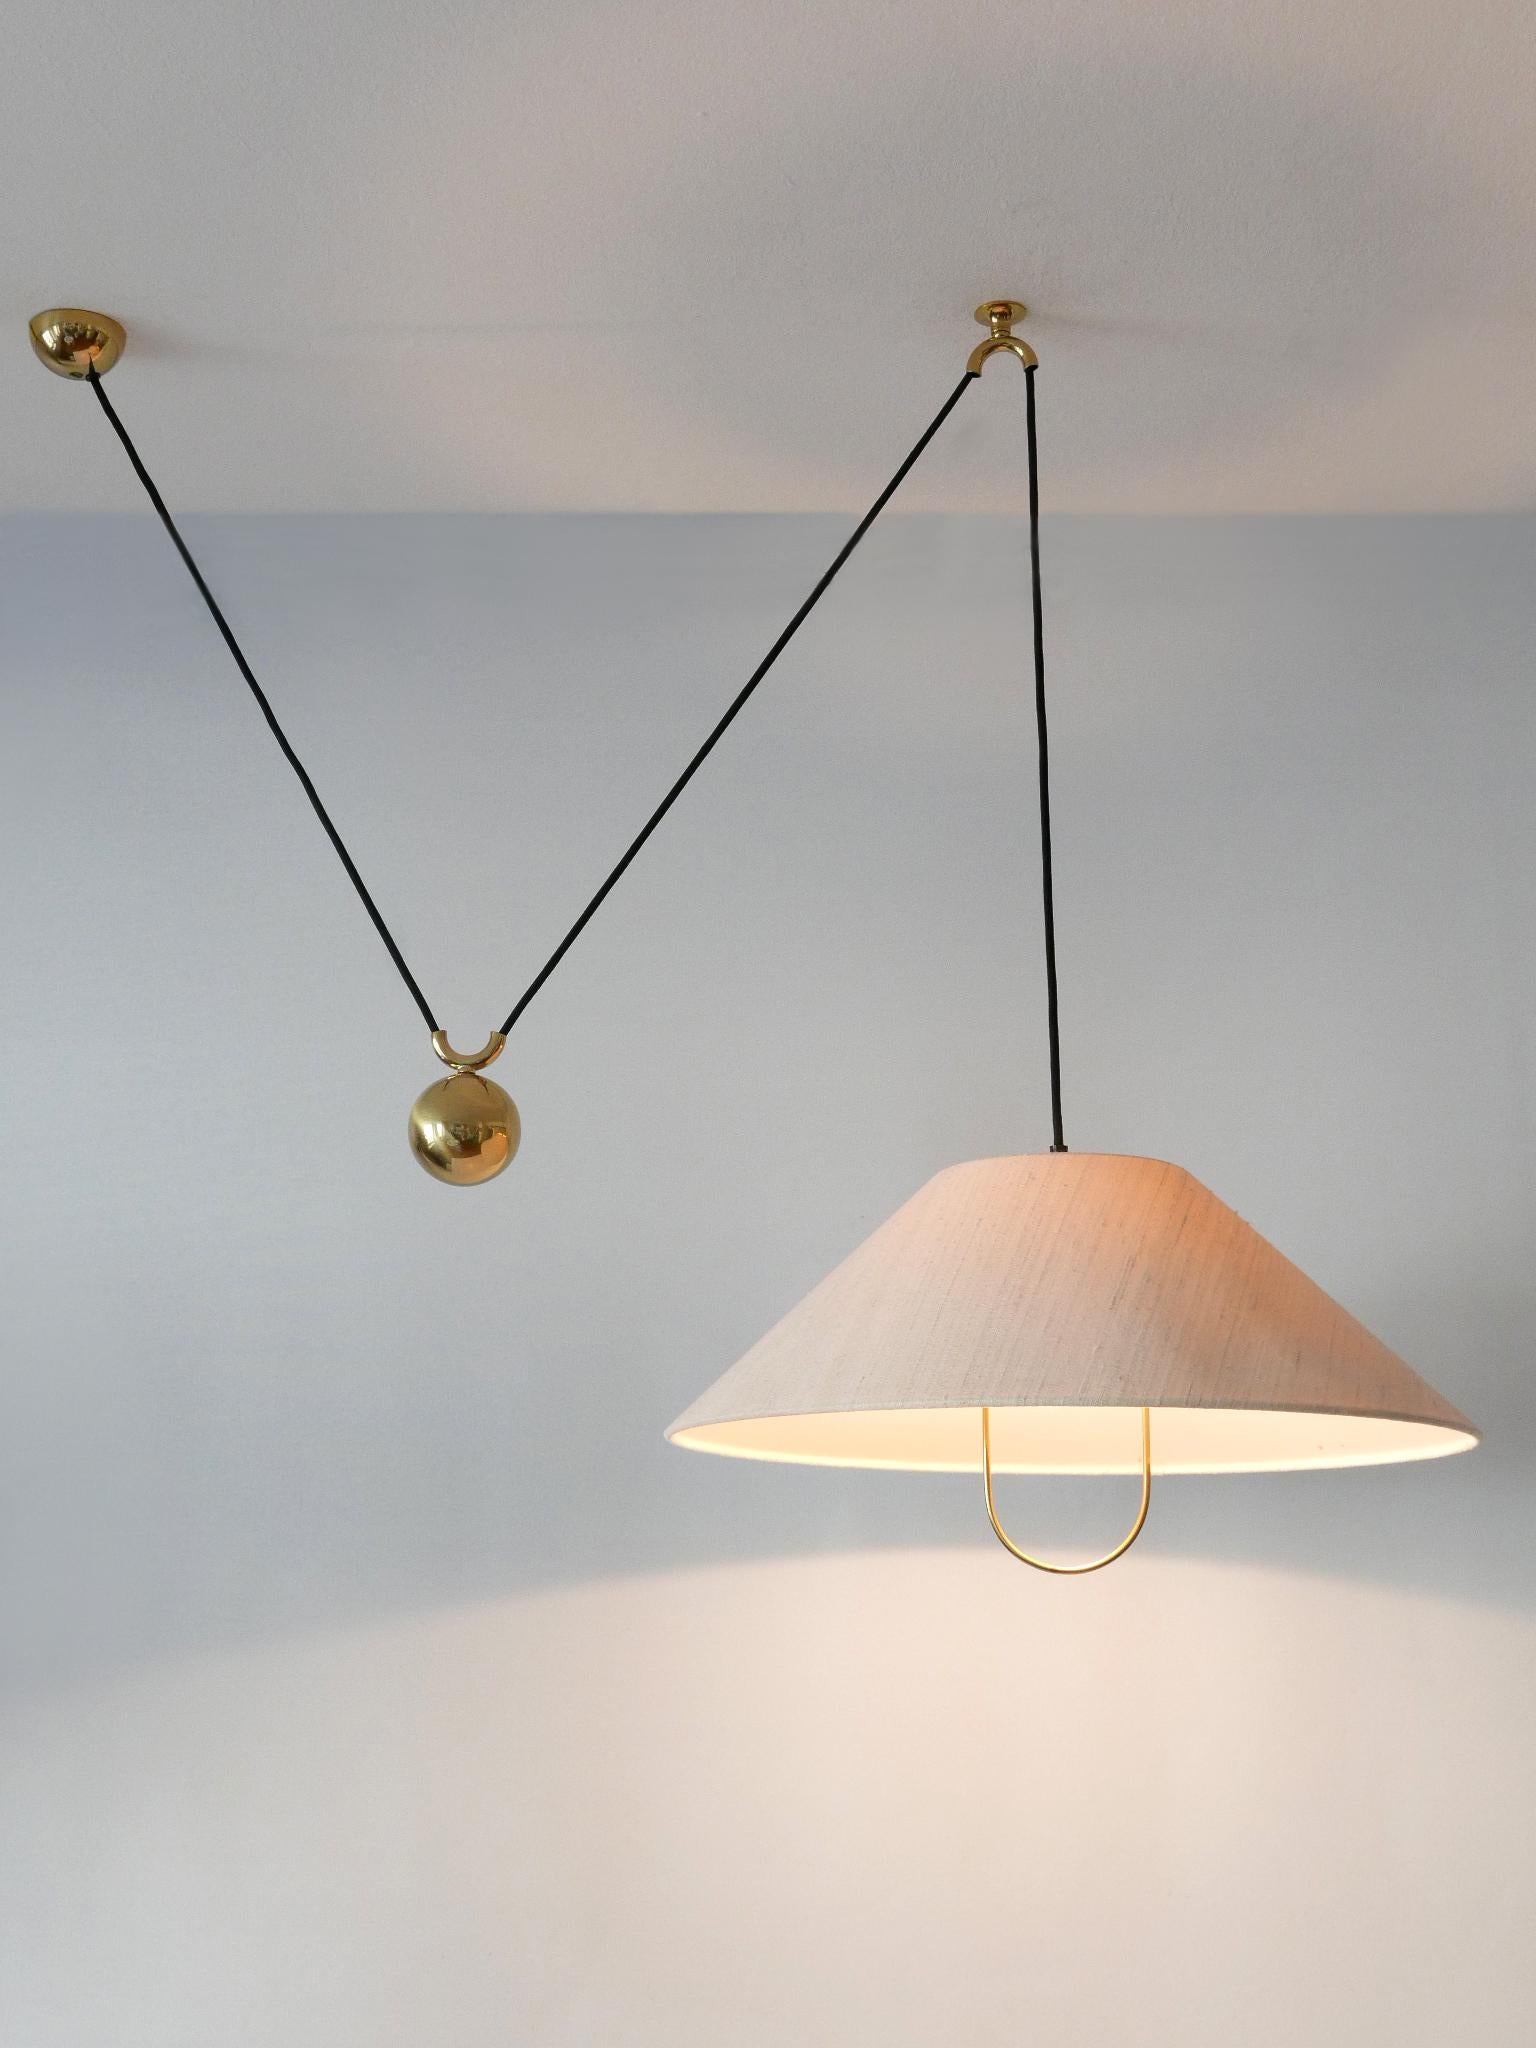 Polished Rare & Early Counterweight Pendant Lamp by Florian Schulz Germany, 1960s